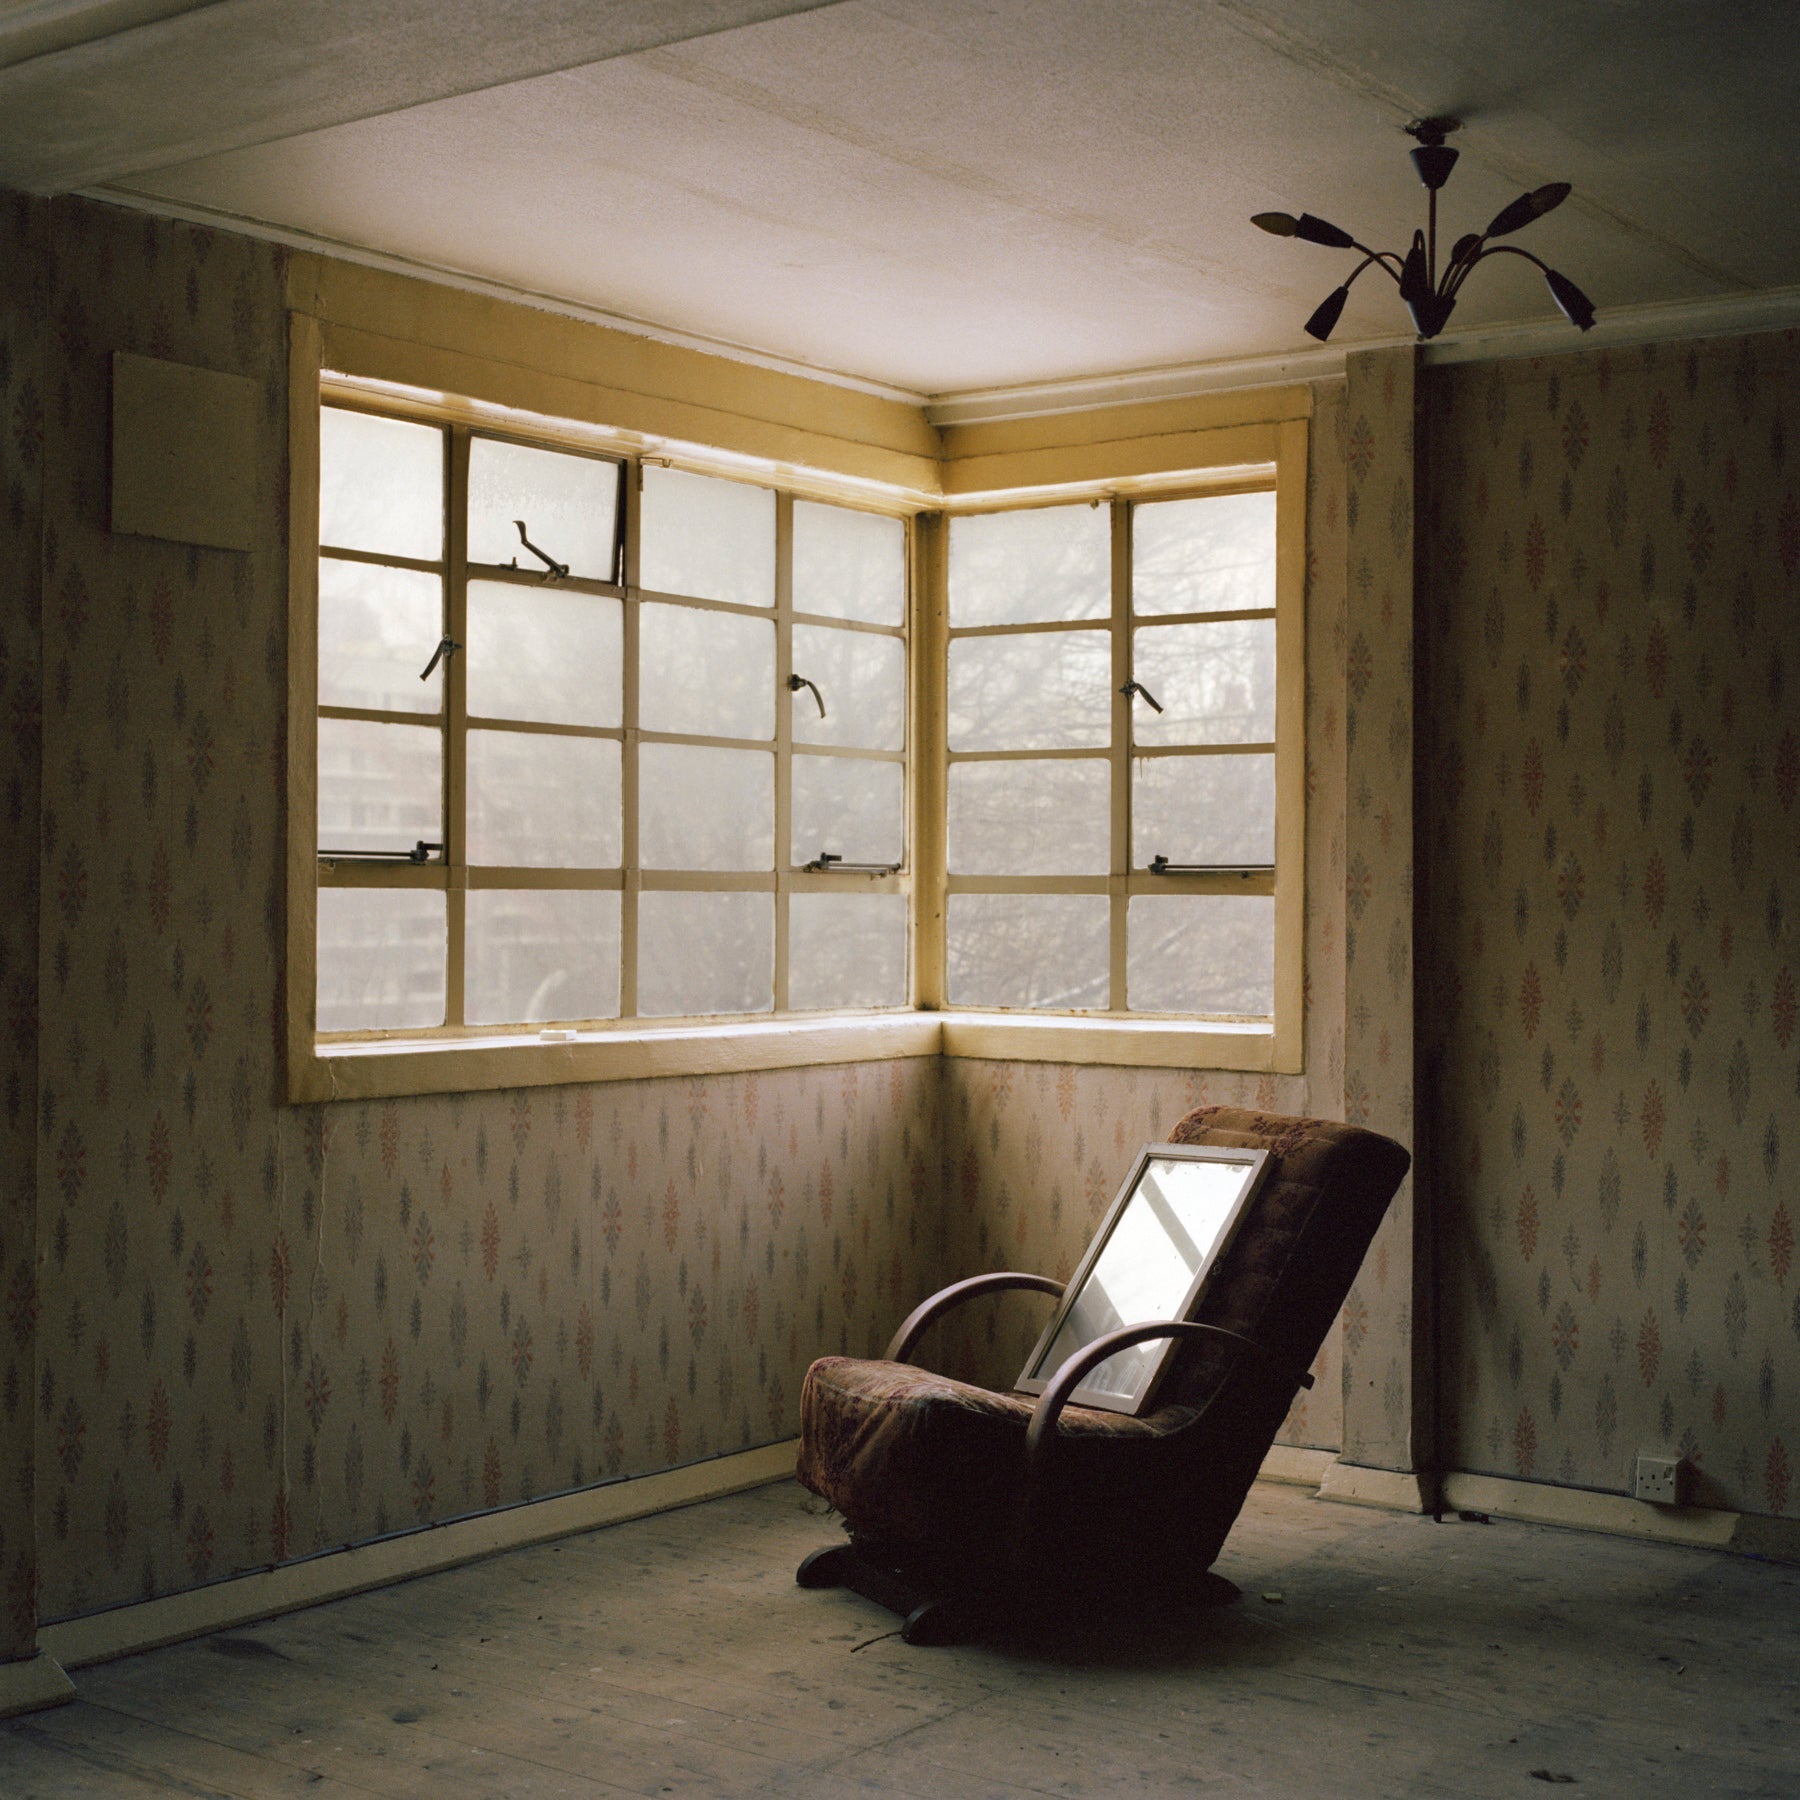 The chair, Priestly House Interior, Quarry Hill Flats, Leeds, 1978 - 7x9" Print